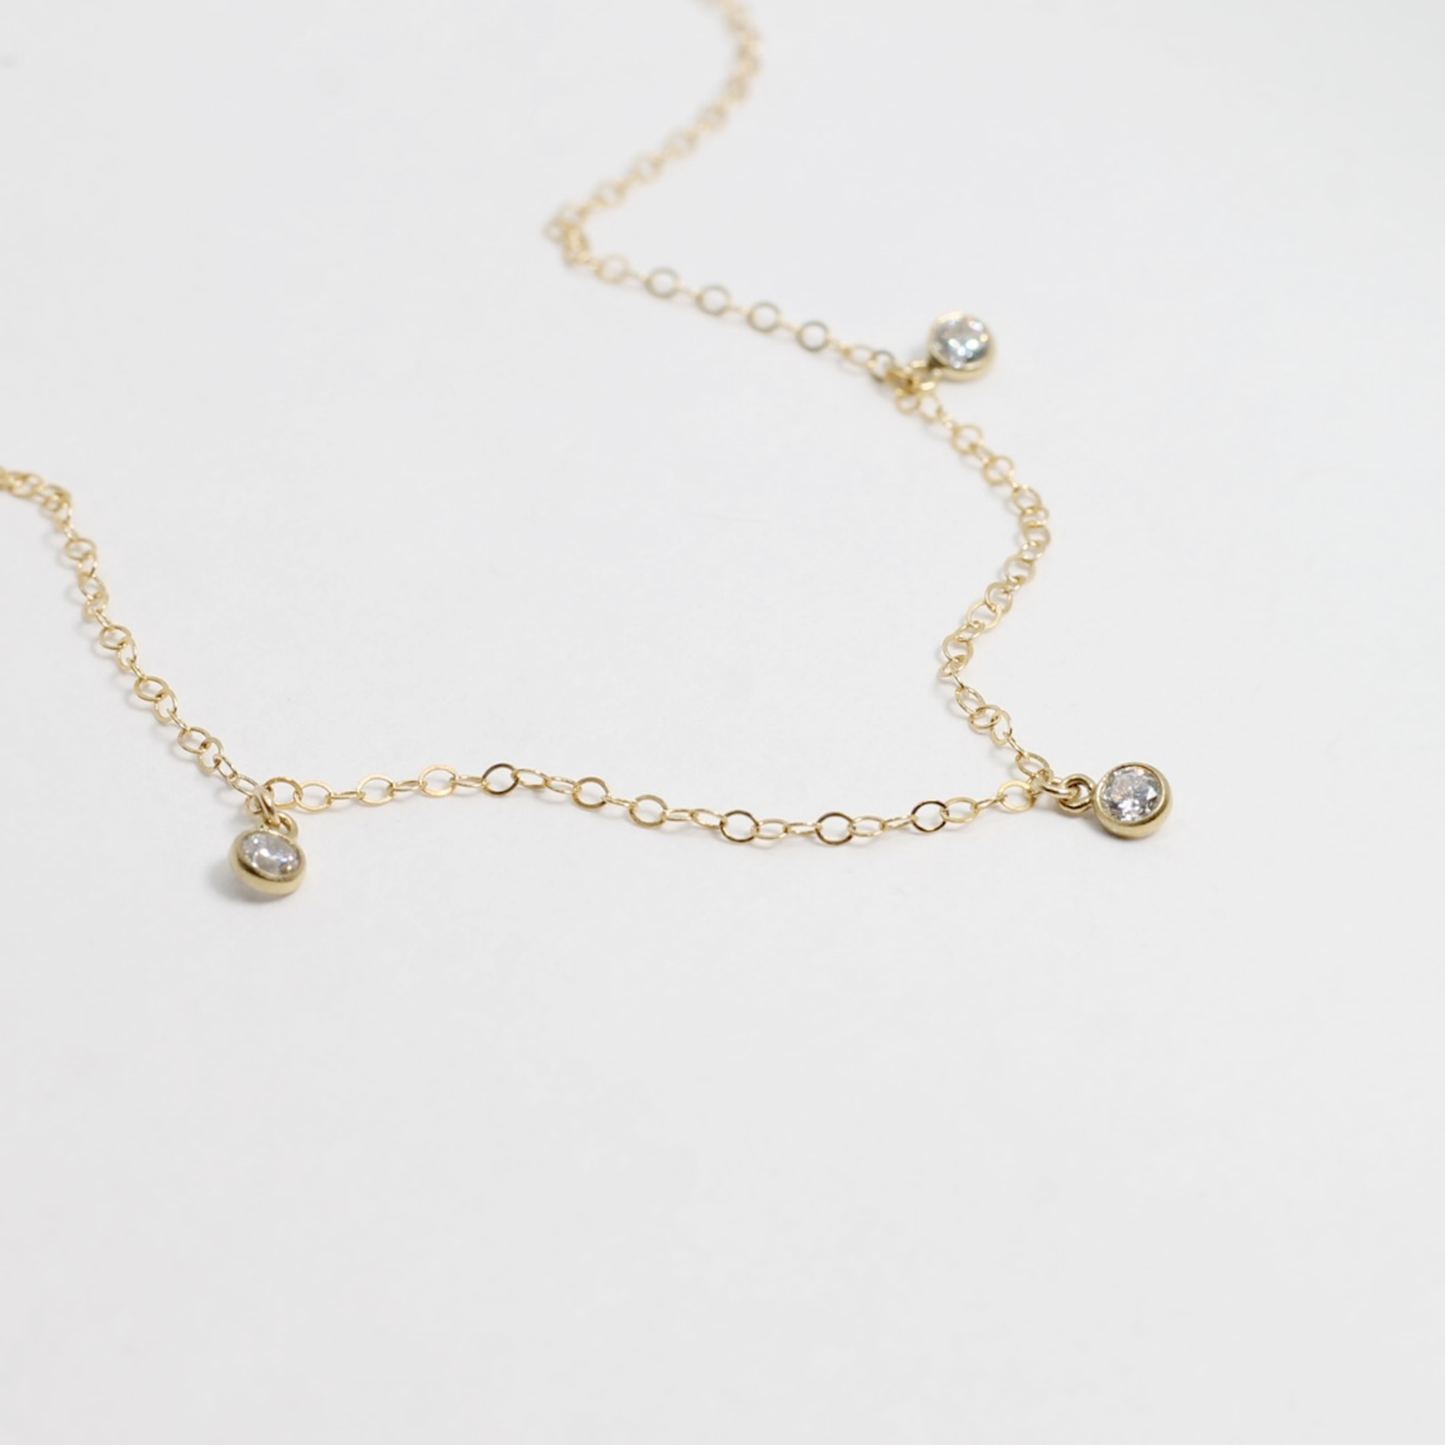 Crystal Drop Anklet - 14k Gold or Silver - The Smart Minimalist